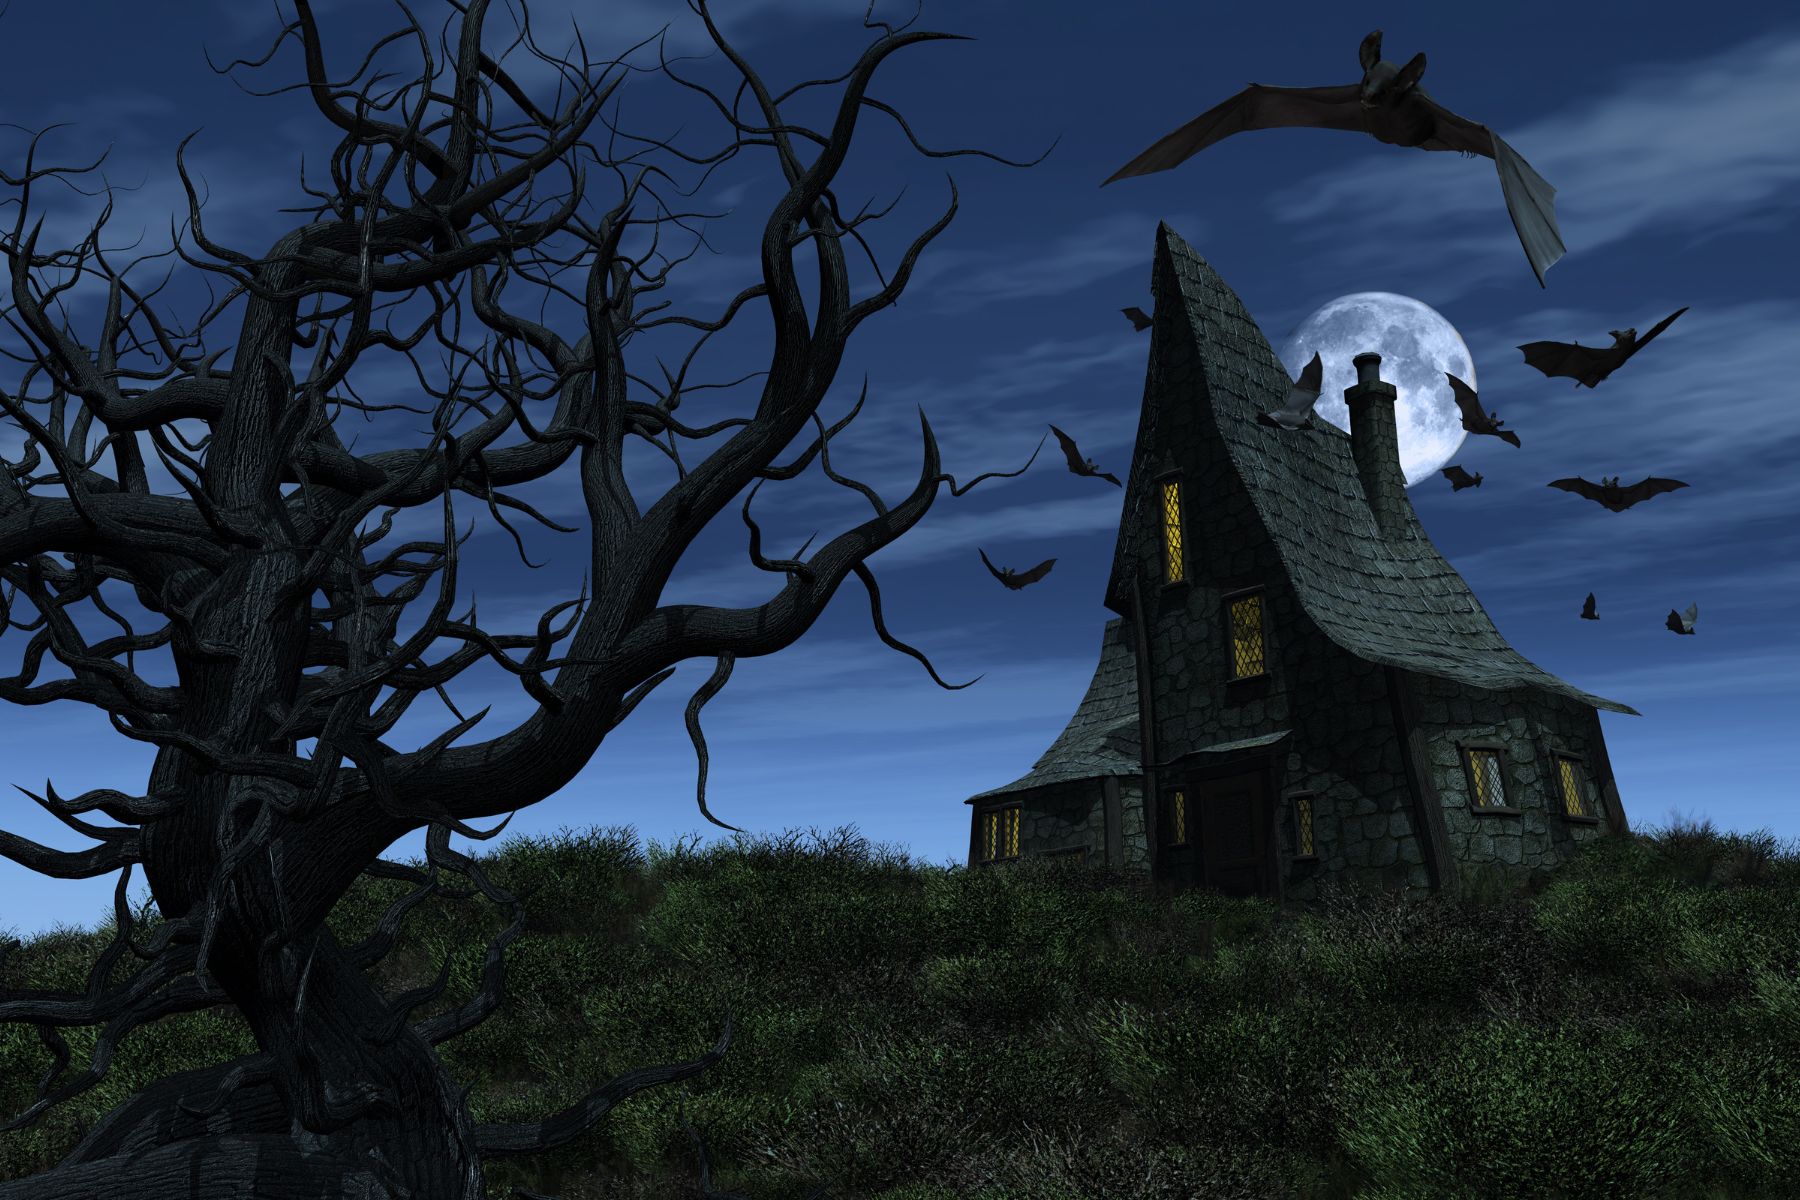 Visit a Haunted House